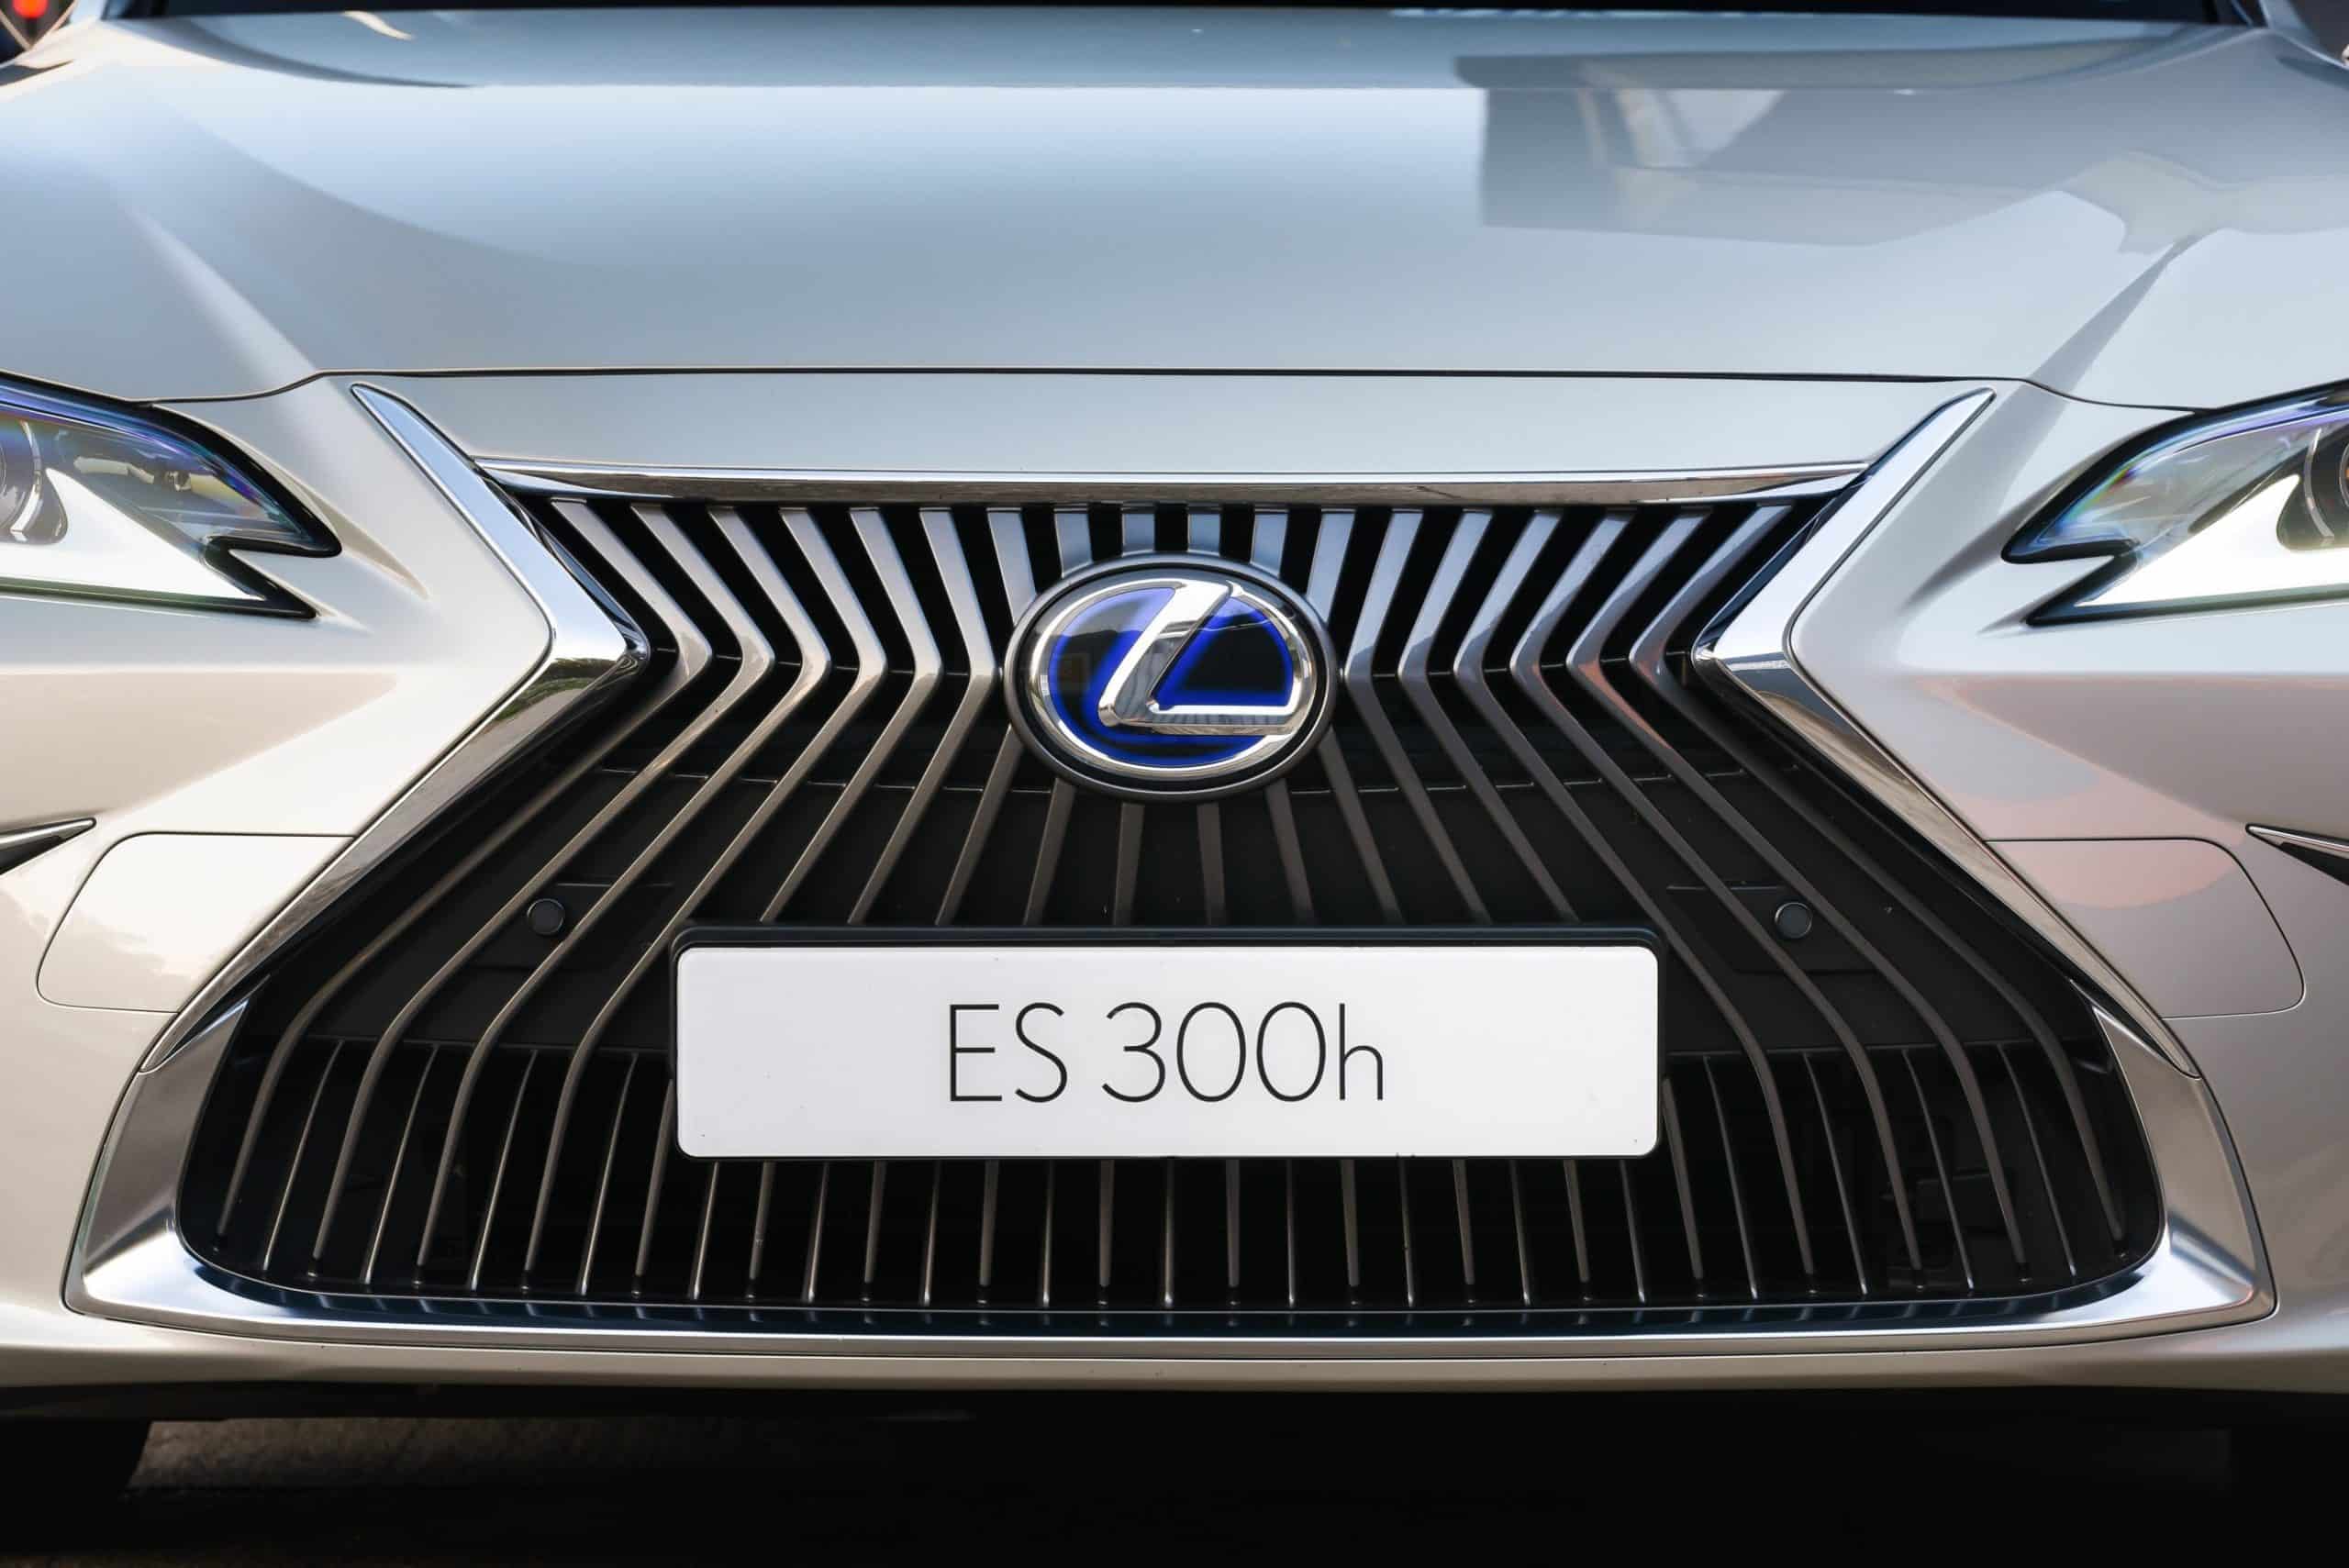 Intricacy of design is a hallmark of the Lexus ES. The updated look has that unmistakable Lexus spindle grille, now in its most modern and visually impressive form. 